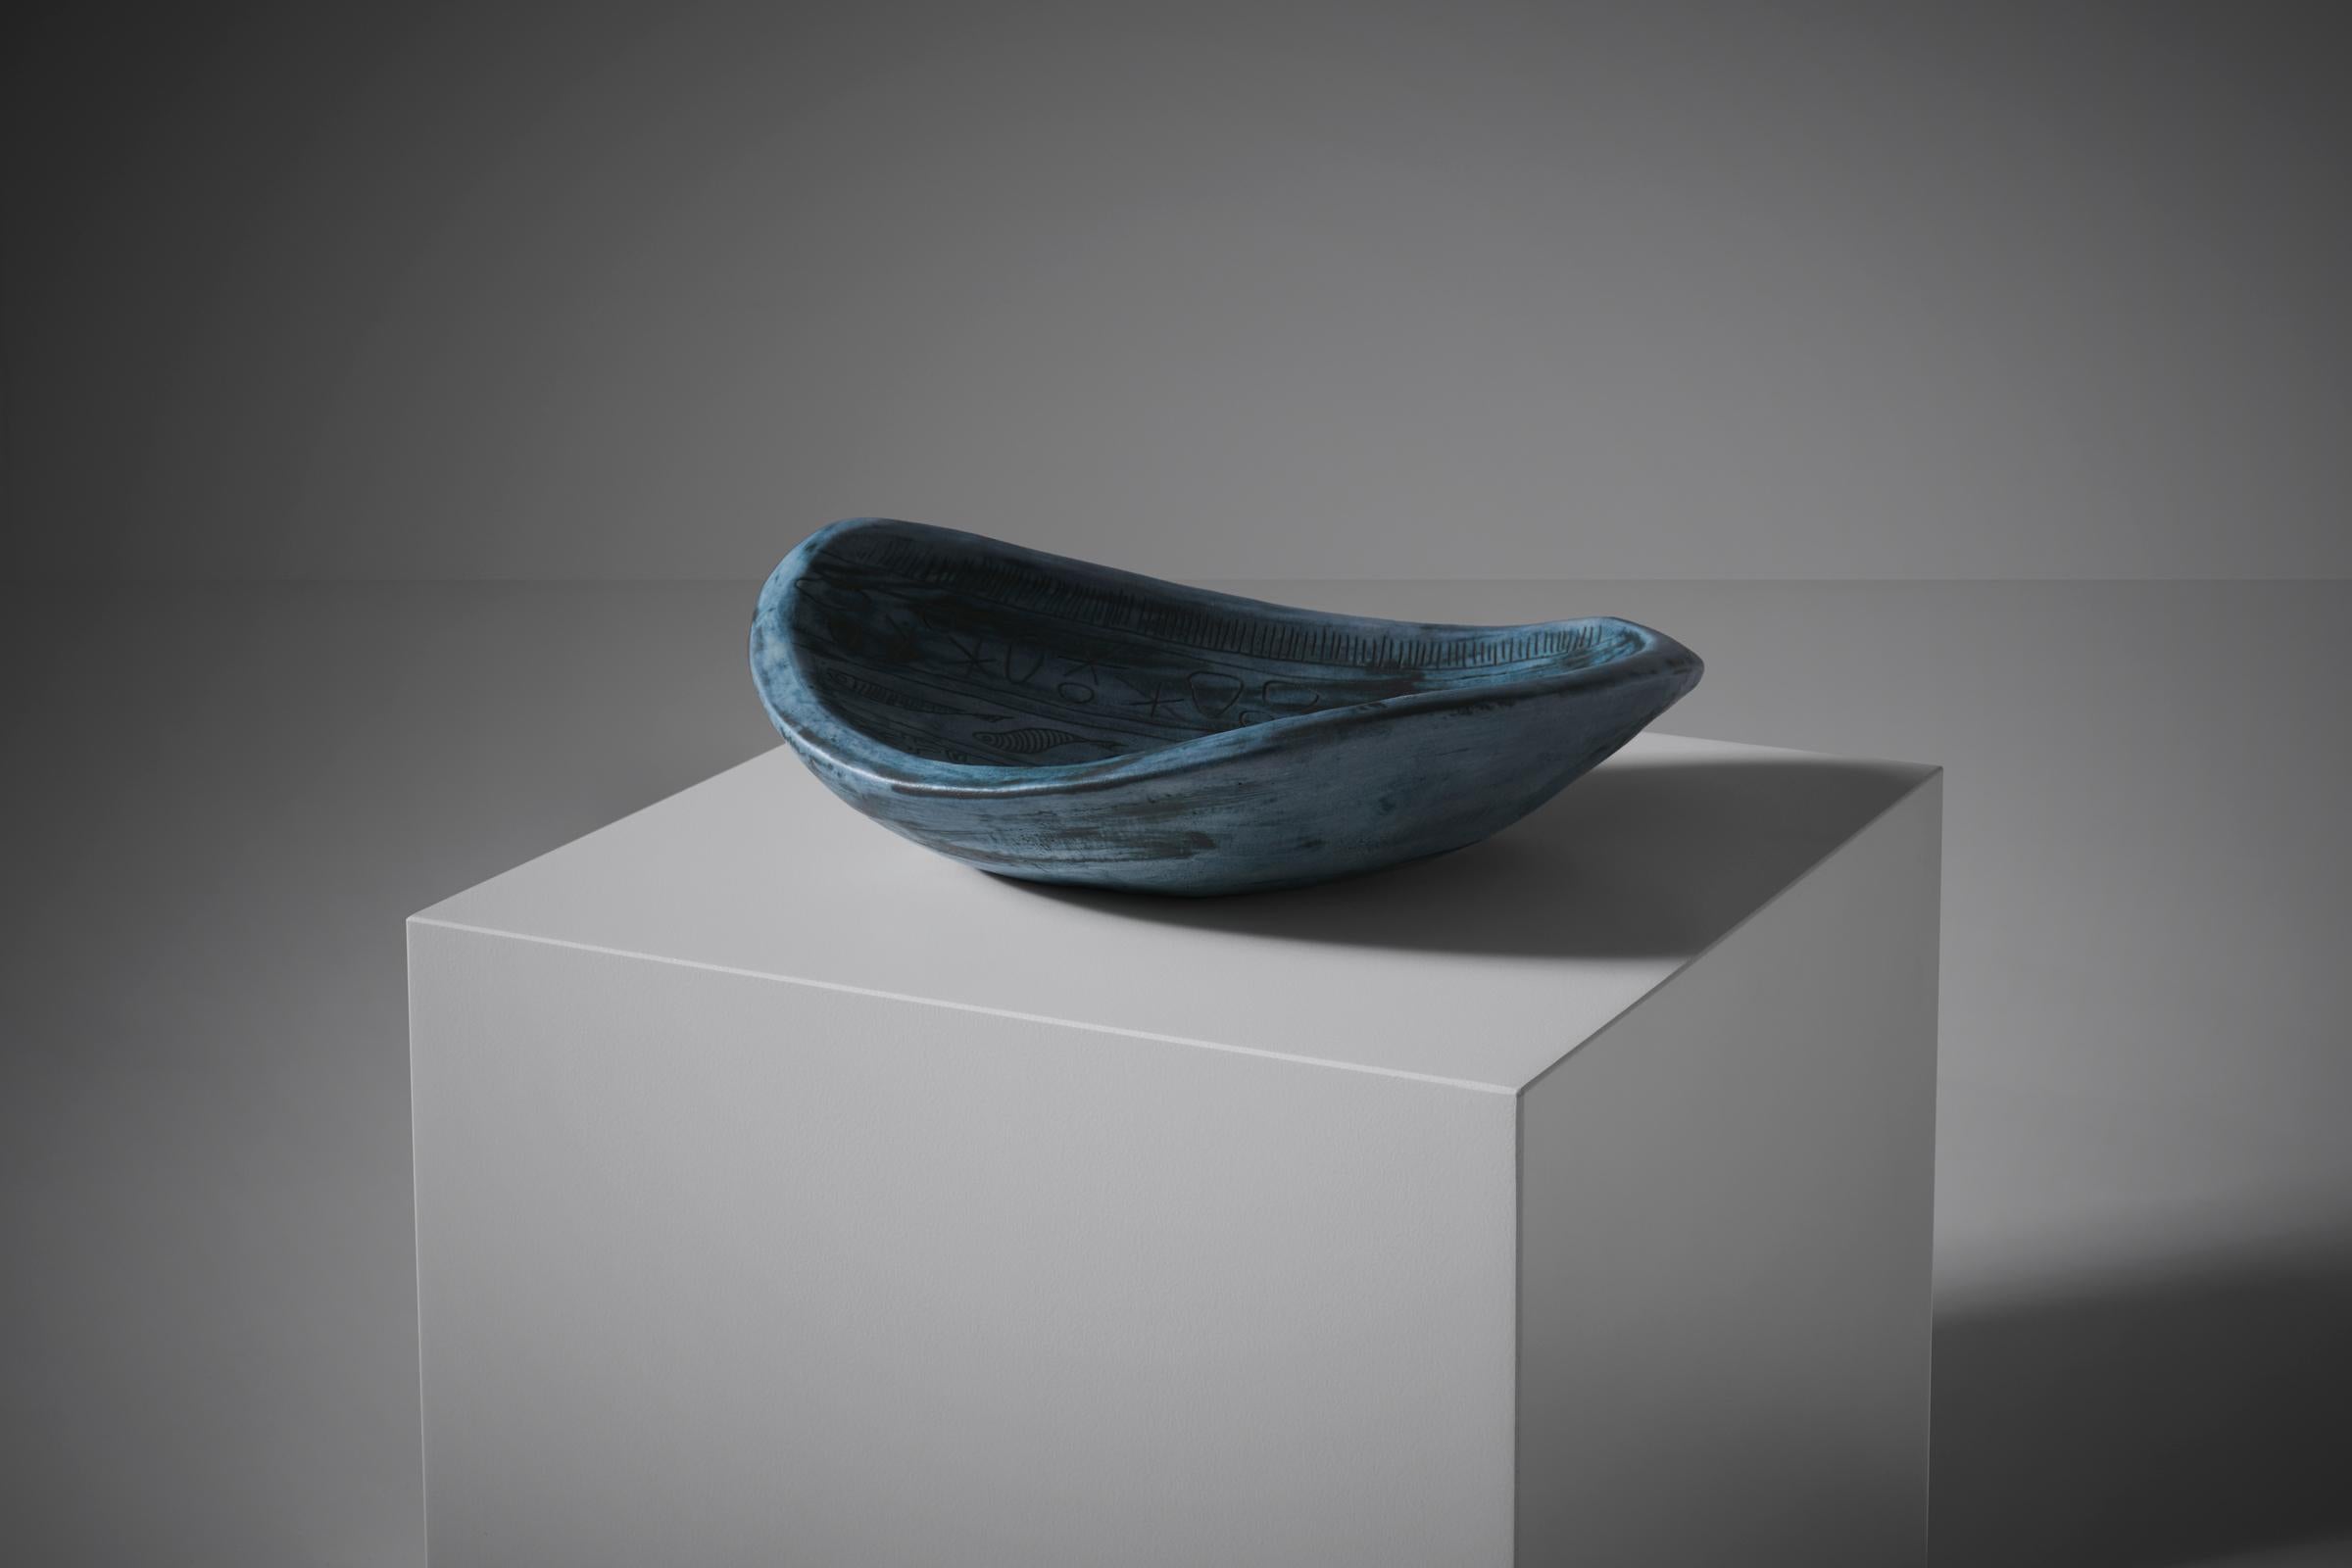 Rare anthropomorphic bowl by Jacques Blin (1920-1995), France 1950s. Unique piece with a beautiful color scheme of blue tones and dark grey. Interesting engraved decoration. Jacques Blin is considered as one of the important French mid-century